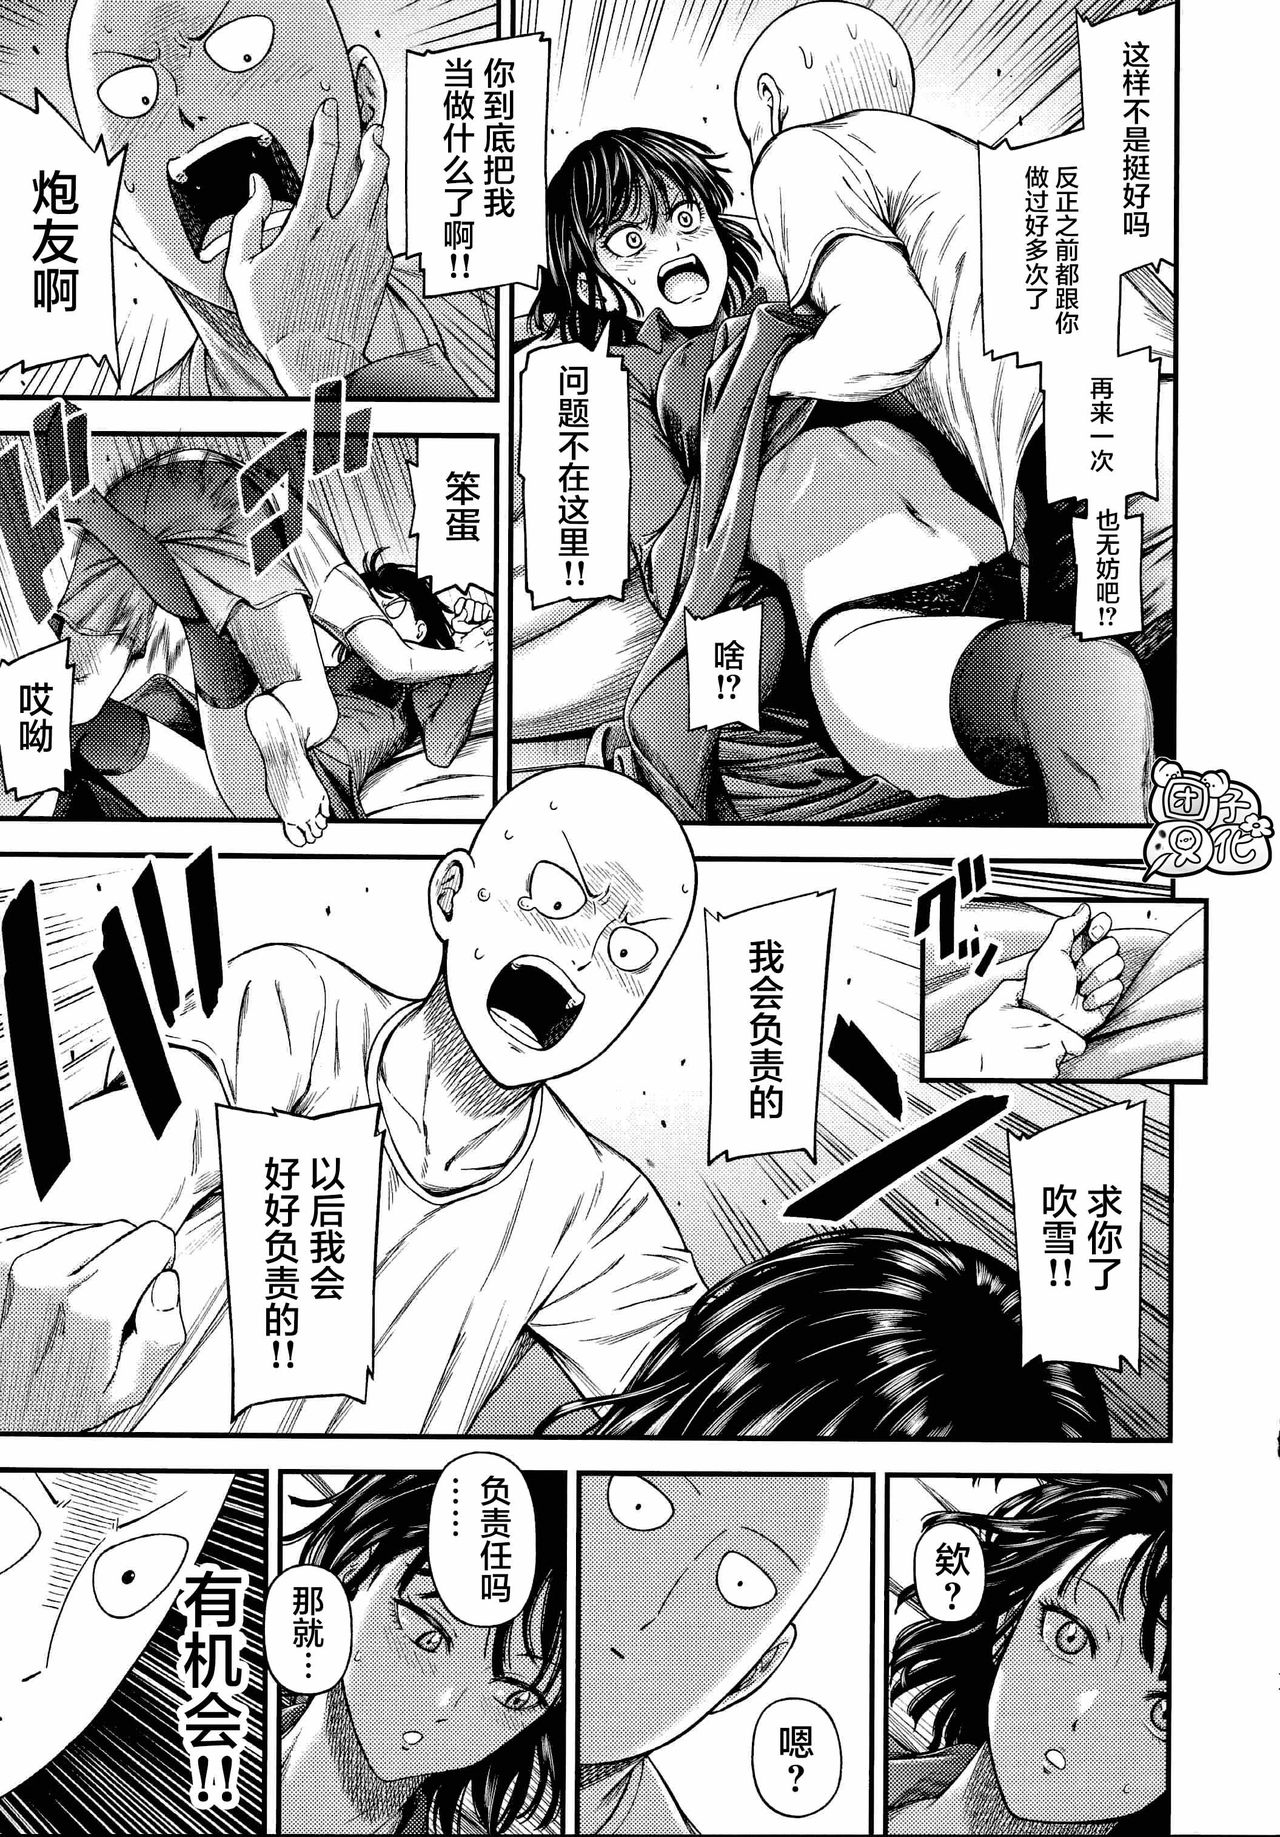 [Kiyosumi Hurricane (Kiyosumi Hurricane)] ONE-HURRICANE (One Punch Man) page 12 full